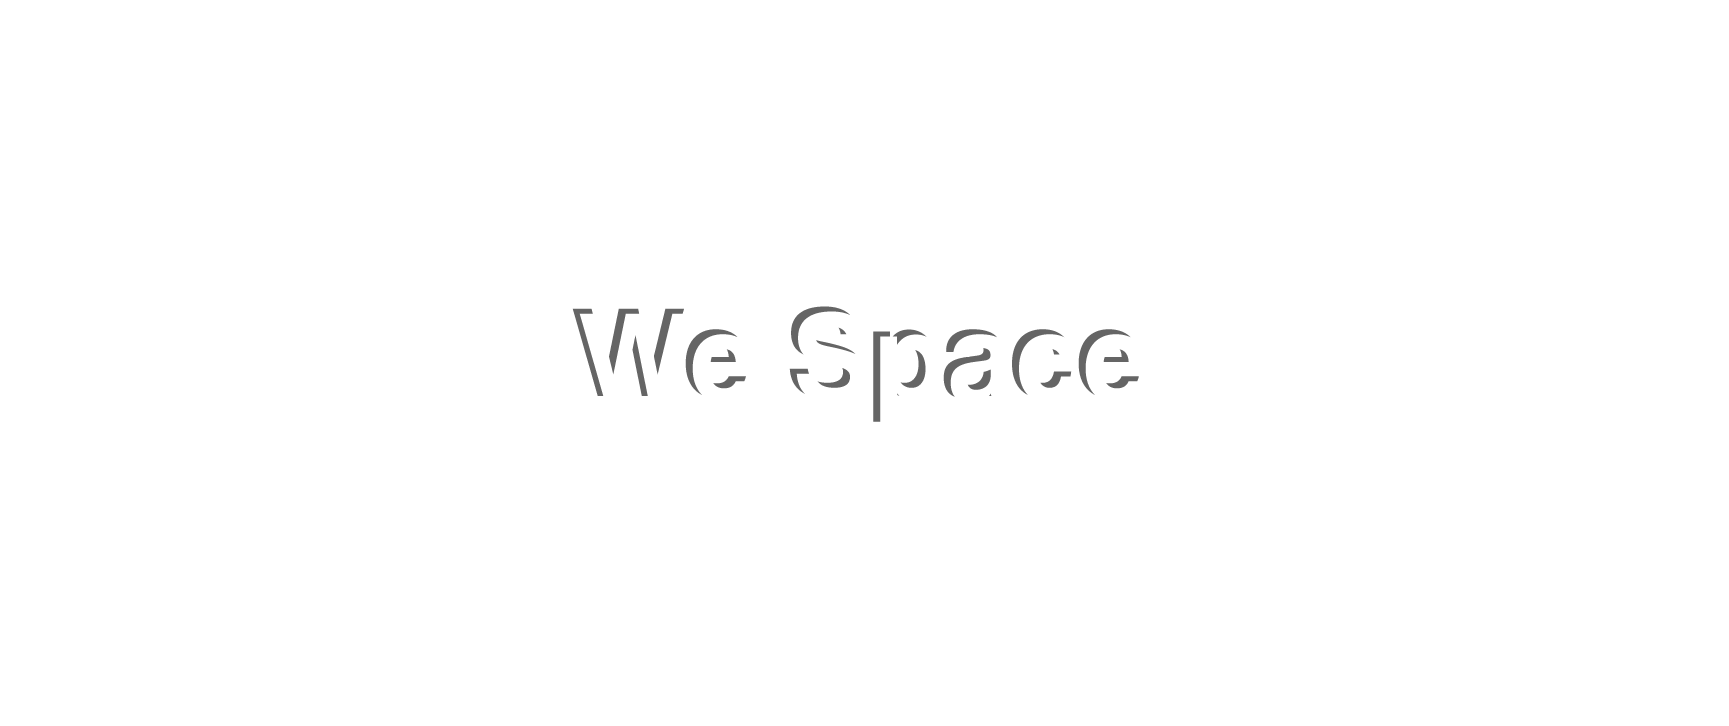 WeSpace